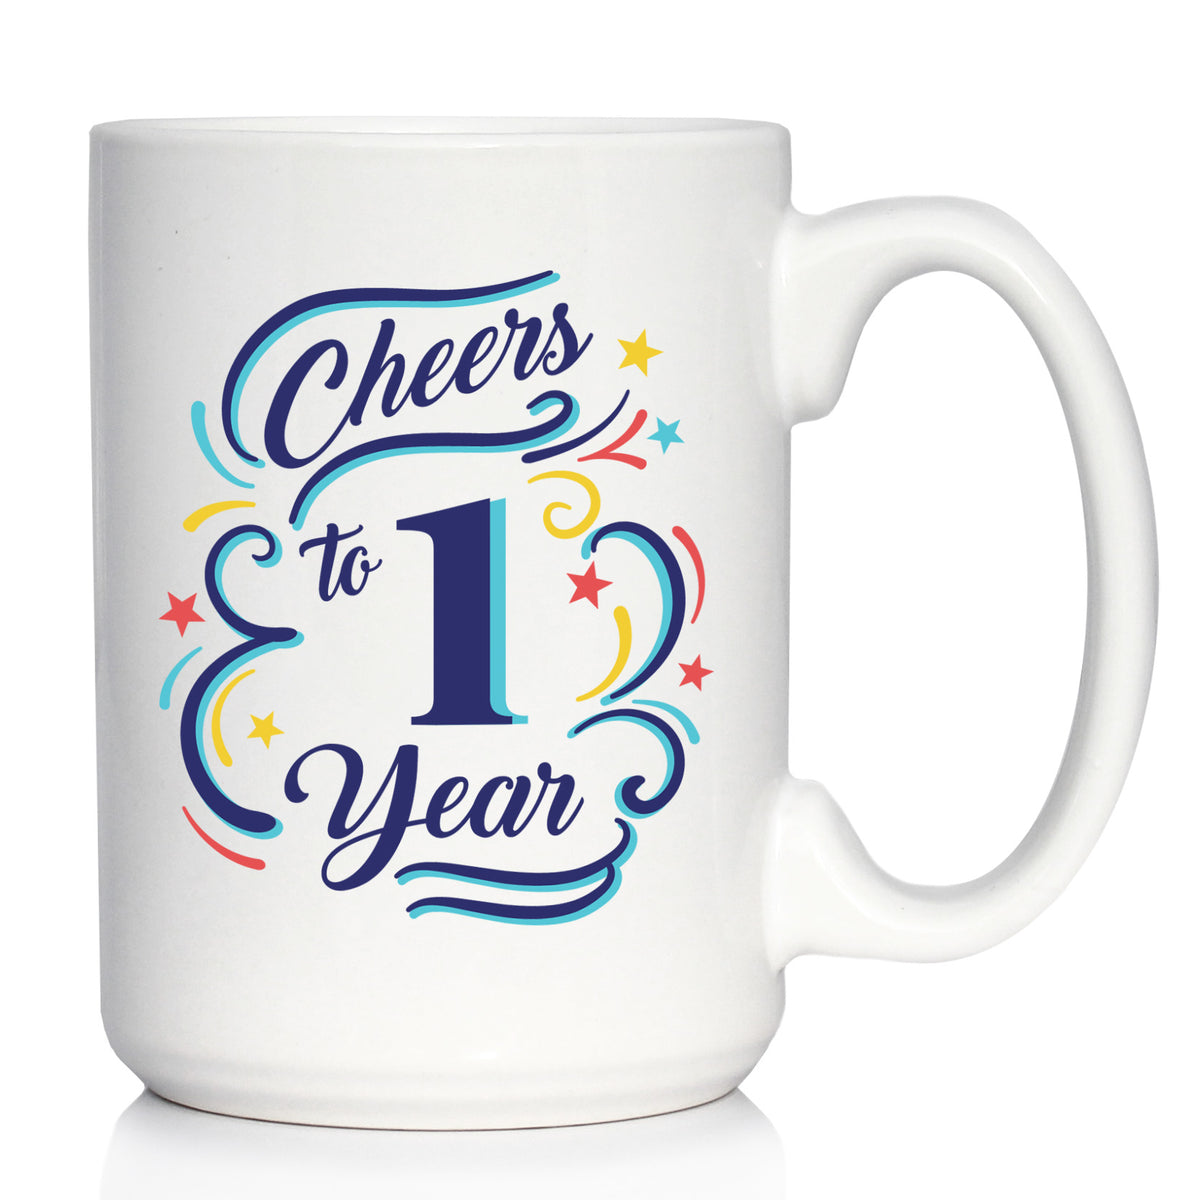 Cheers to 1 Year - Coffee Mug Gifts for Women &amp; Men - 1st Anniversary Party Decor